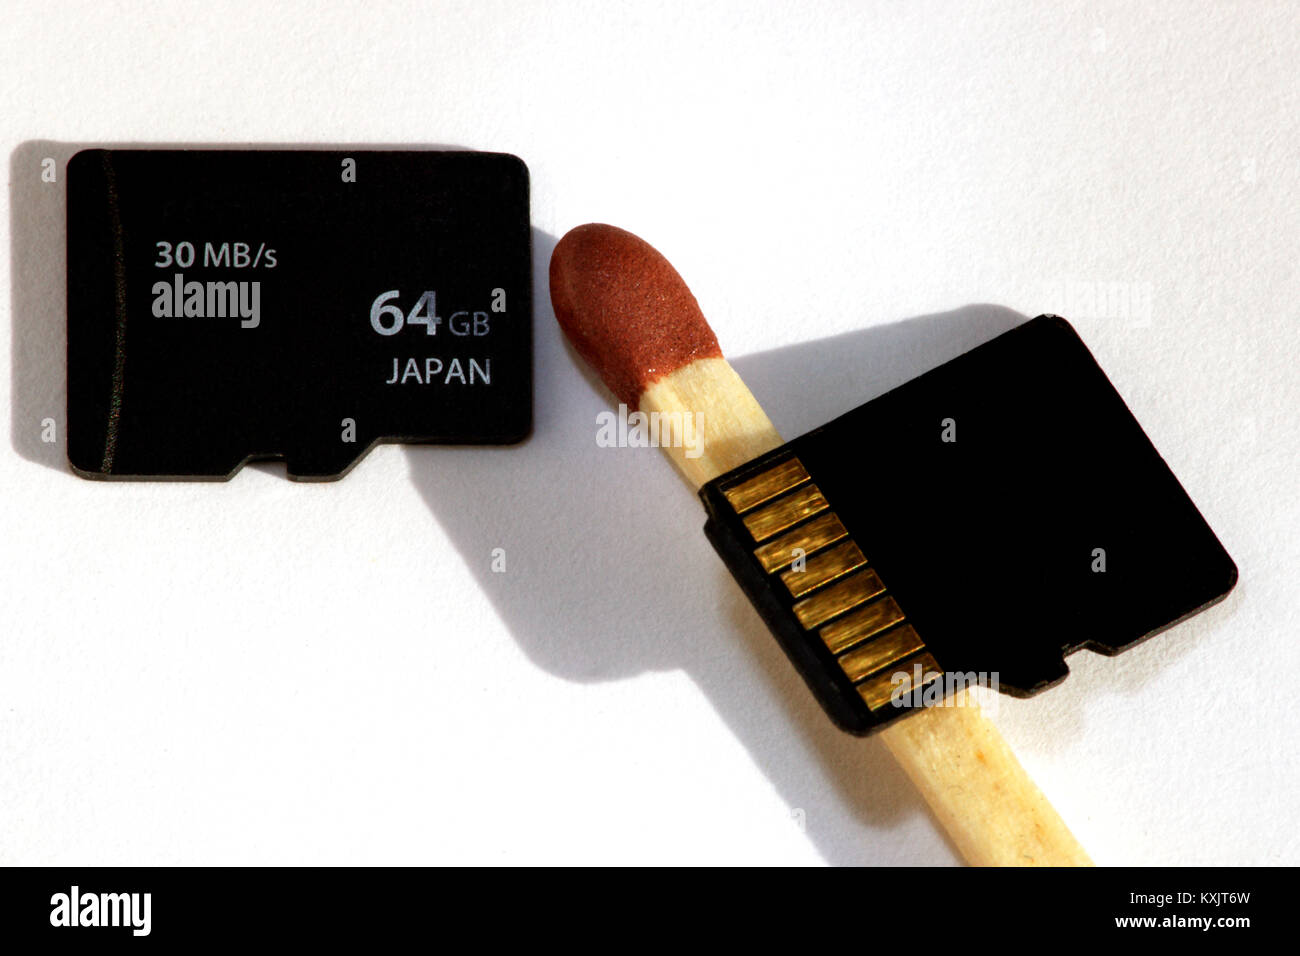 Micro sd cards in relation to a match Stock Photo